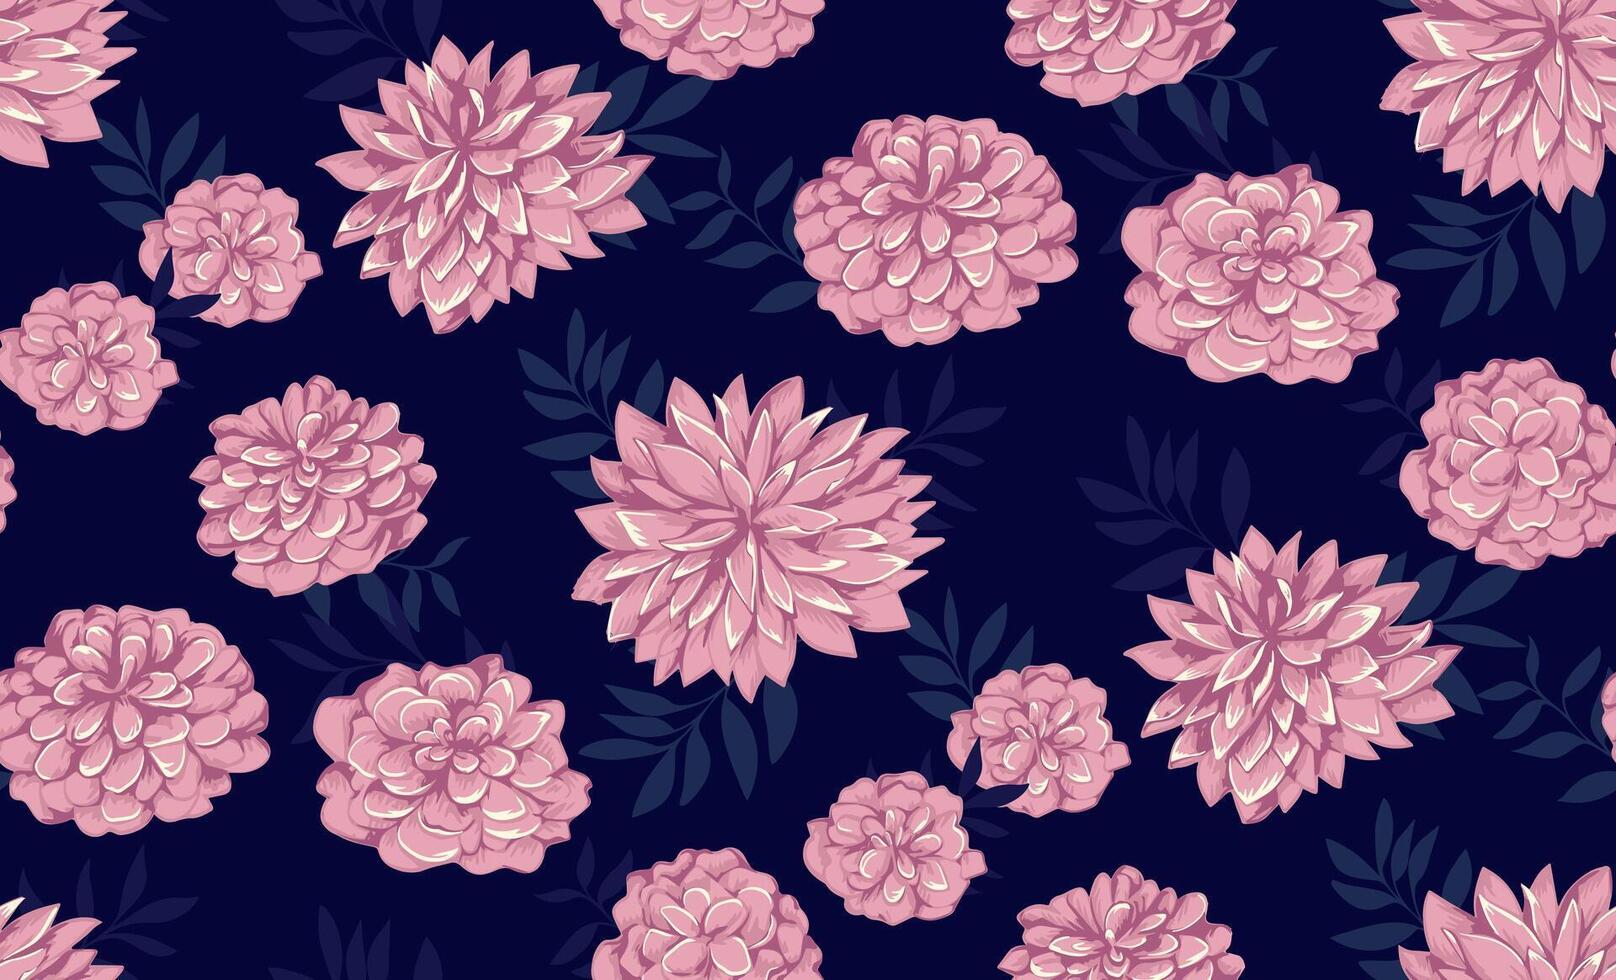 Abstract artistic pink floral and shape leaves seamless pattern on a dark blue background. Stylized flowers peonies, dahlias printing. Vector hand drawn illustration. Design for fashion, textiles